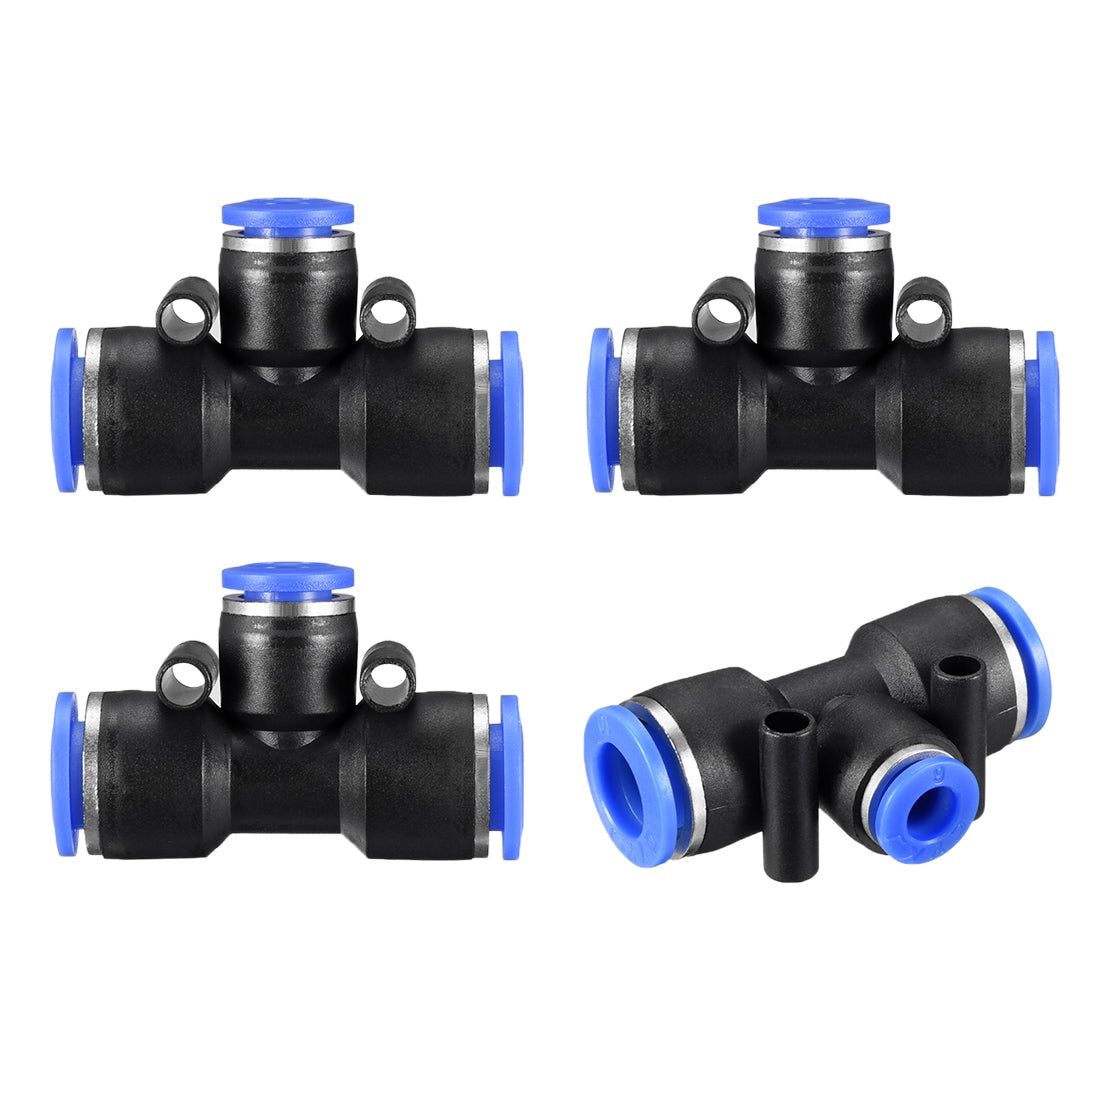 uxcell Uxcell 4 pcs Push To Connect Fittings T Type Tube Connect 25/64“ -15/64” od Push Fit Fittings Tube Fittings Push Lock Blue (10-6mm T tee)